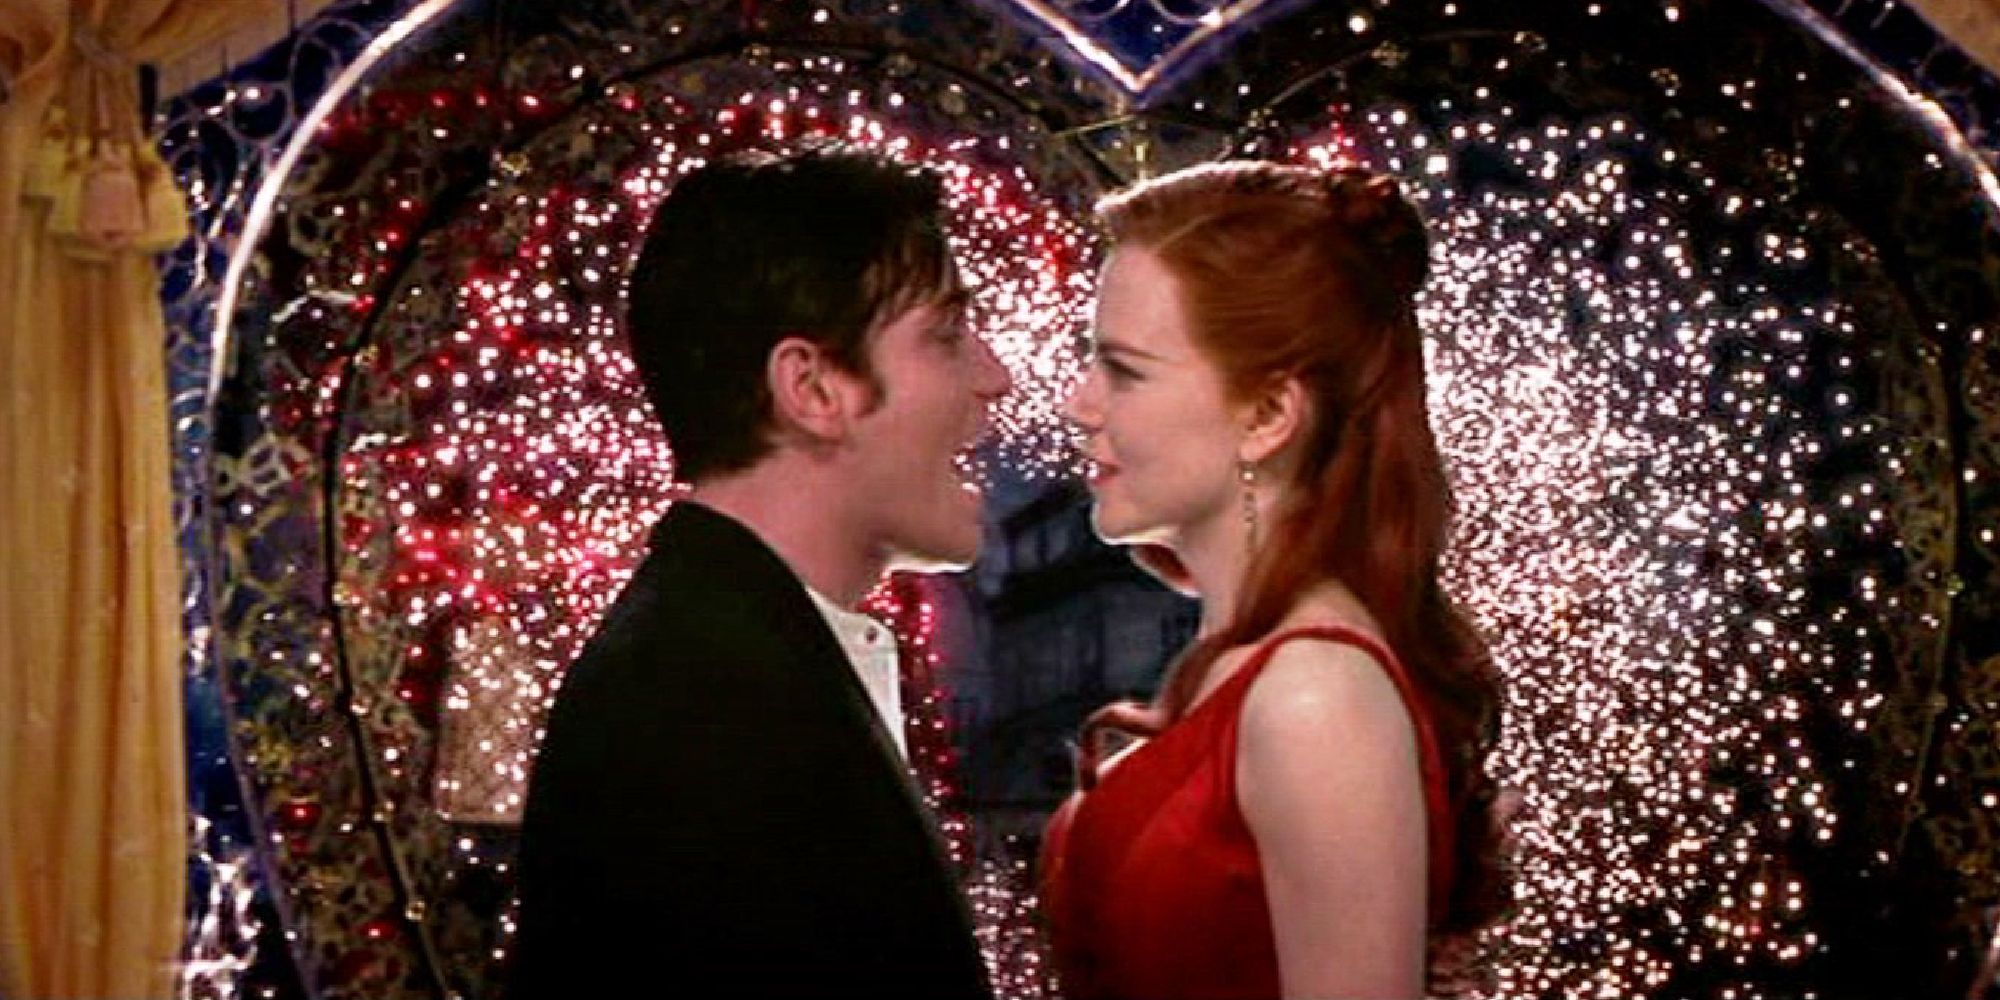 Christian and Satine sing as the lights twinkle in the background of the Moulin Rouge!